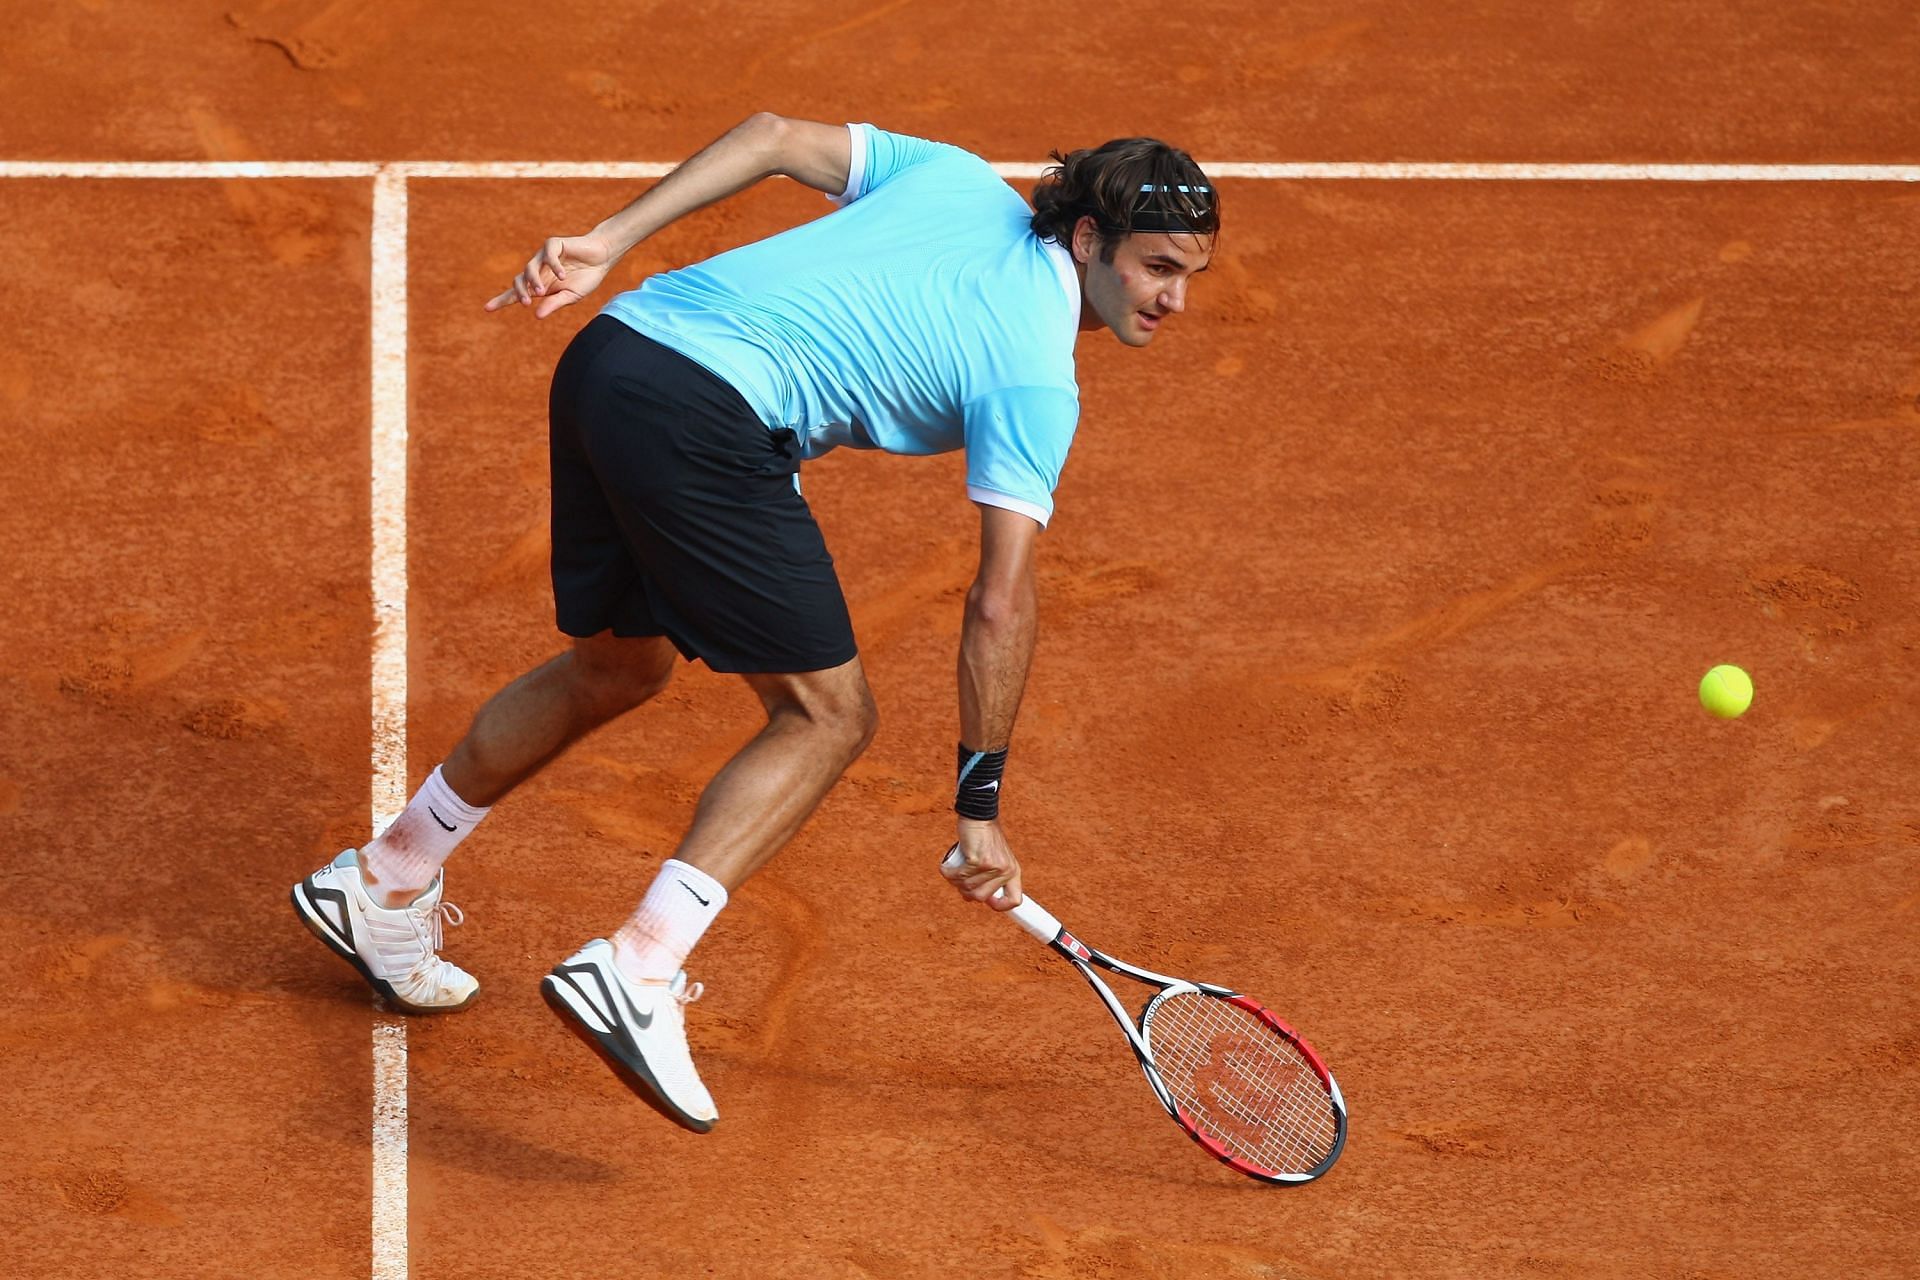 Roger Federer in action against Novak Djokovic at the 2008 Monte Carlo Masters